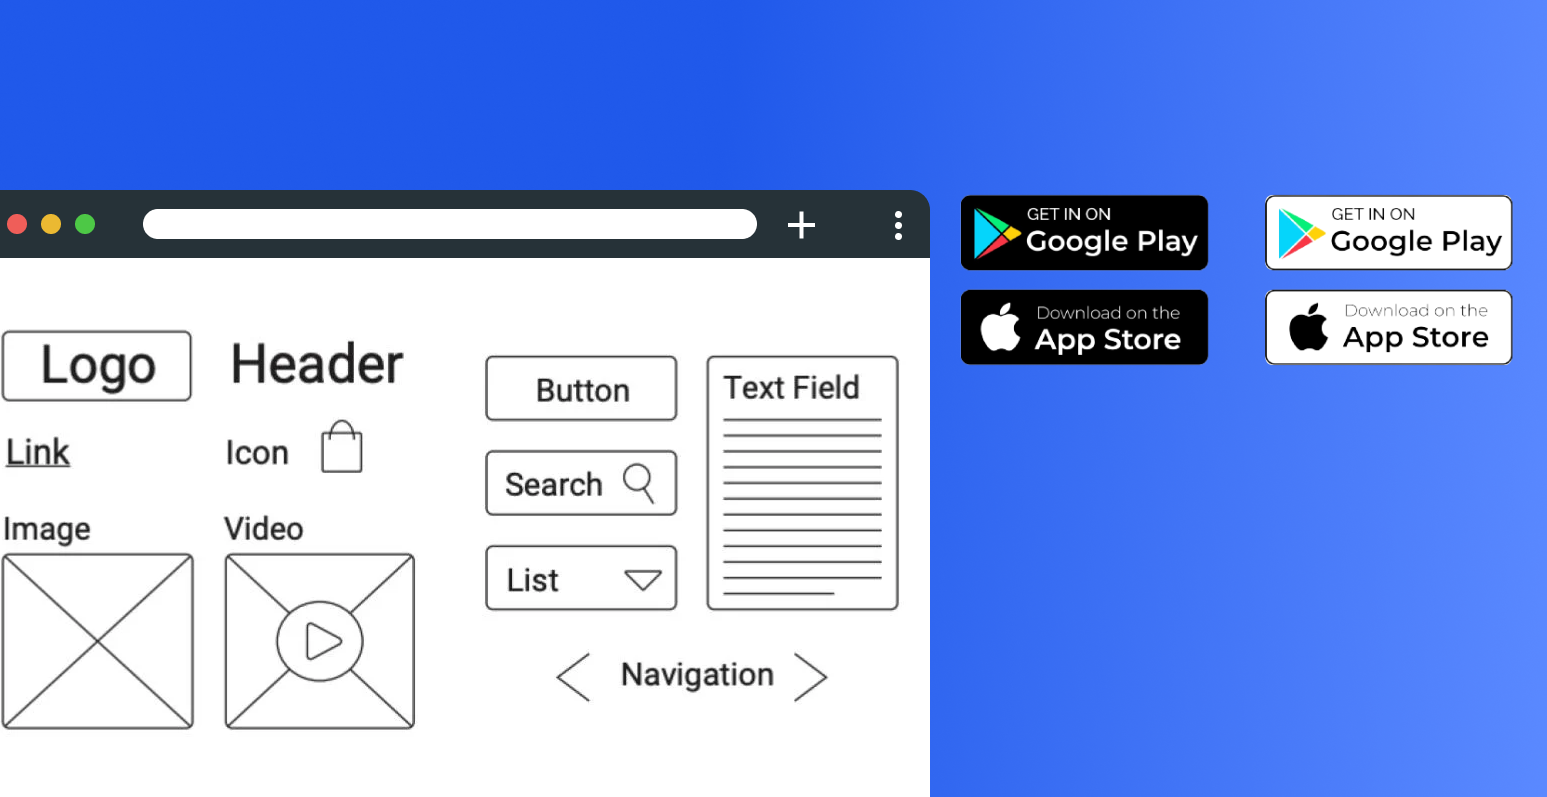 The image on the left showcases multiple empty elements, such as images or videos, that are required for the app store and play store submission. This image suggests that careful consideration of various information is necessary when preparing content for app submission.